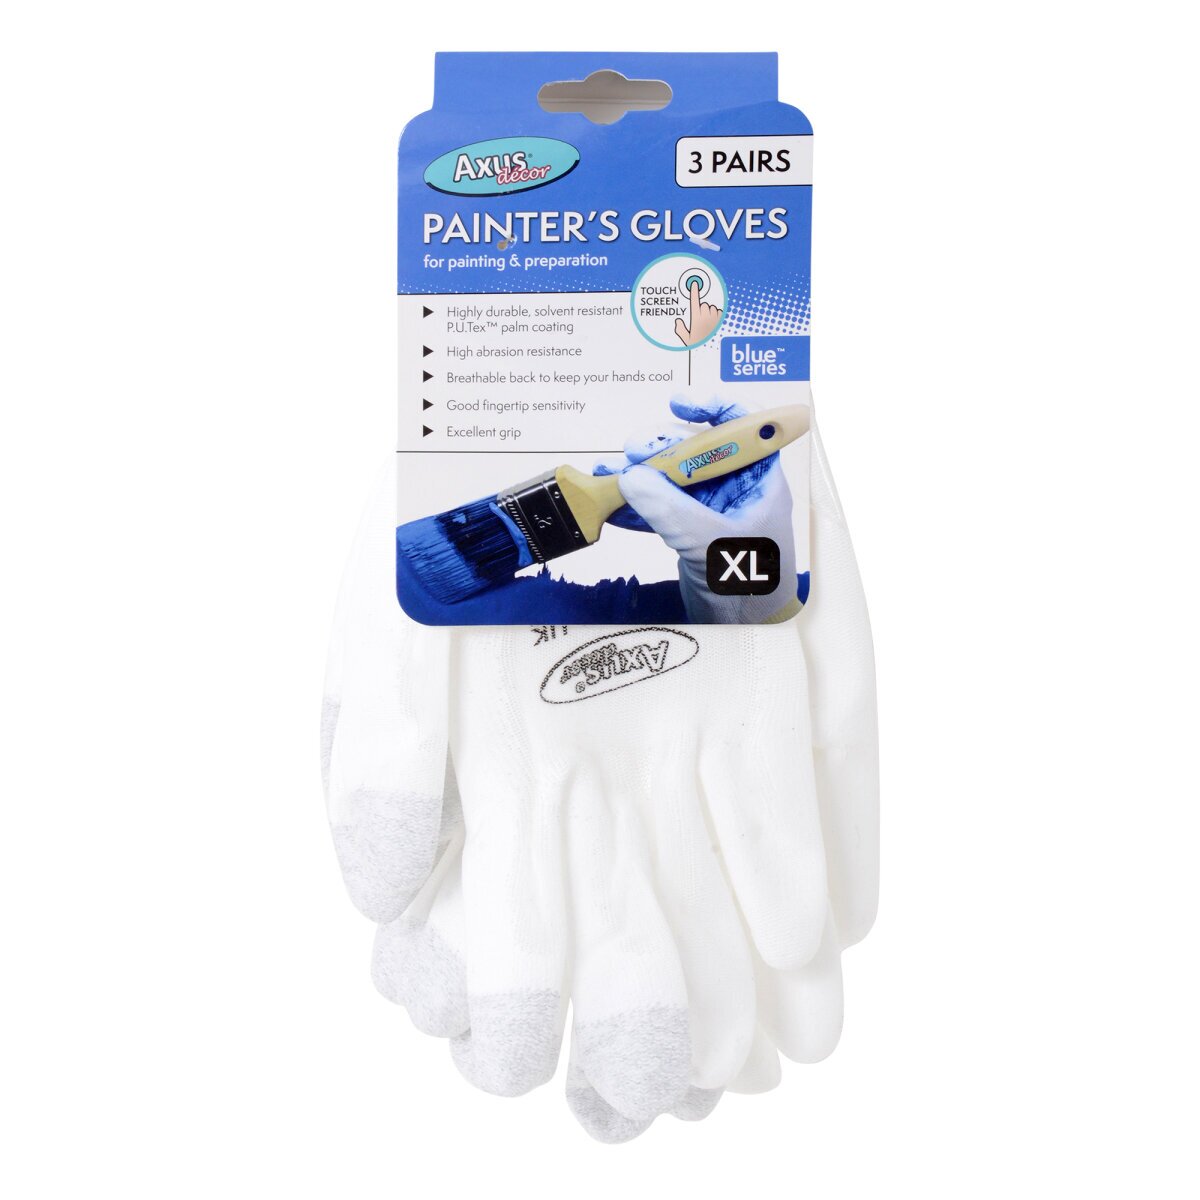 Axus Decor White Painter's Gloves Extra Large (3 Pairs)